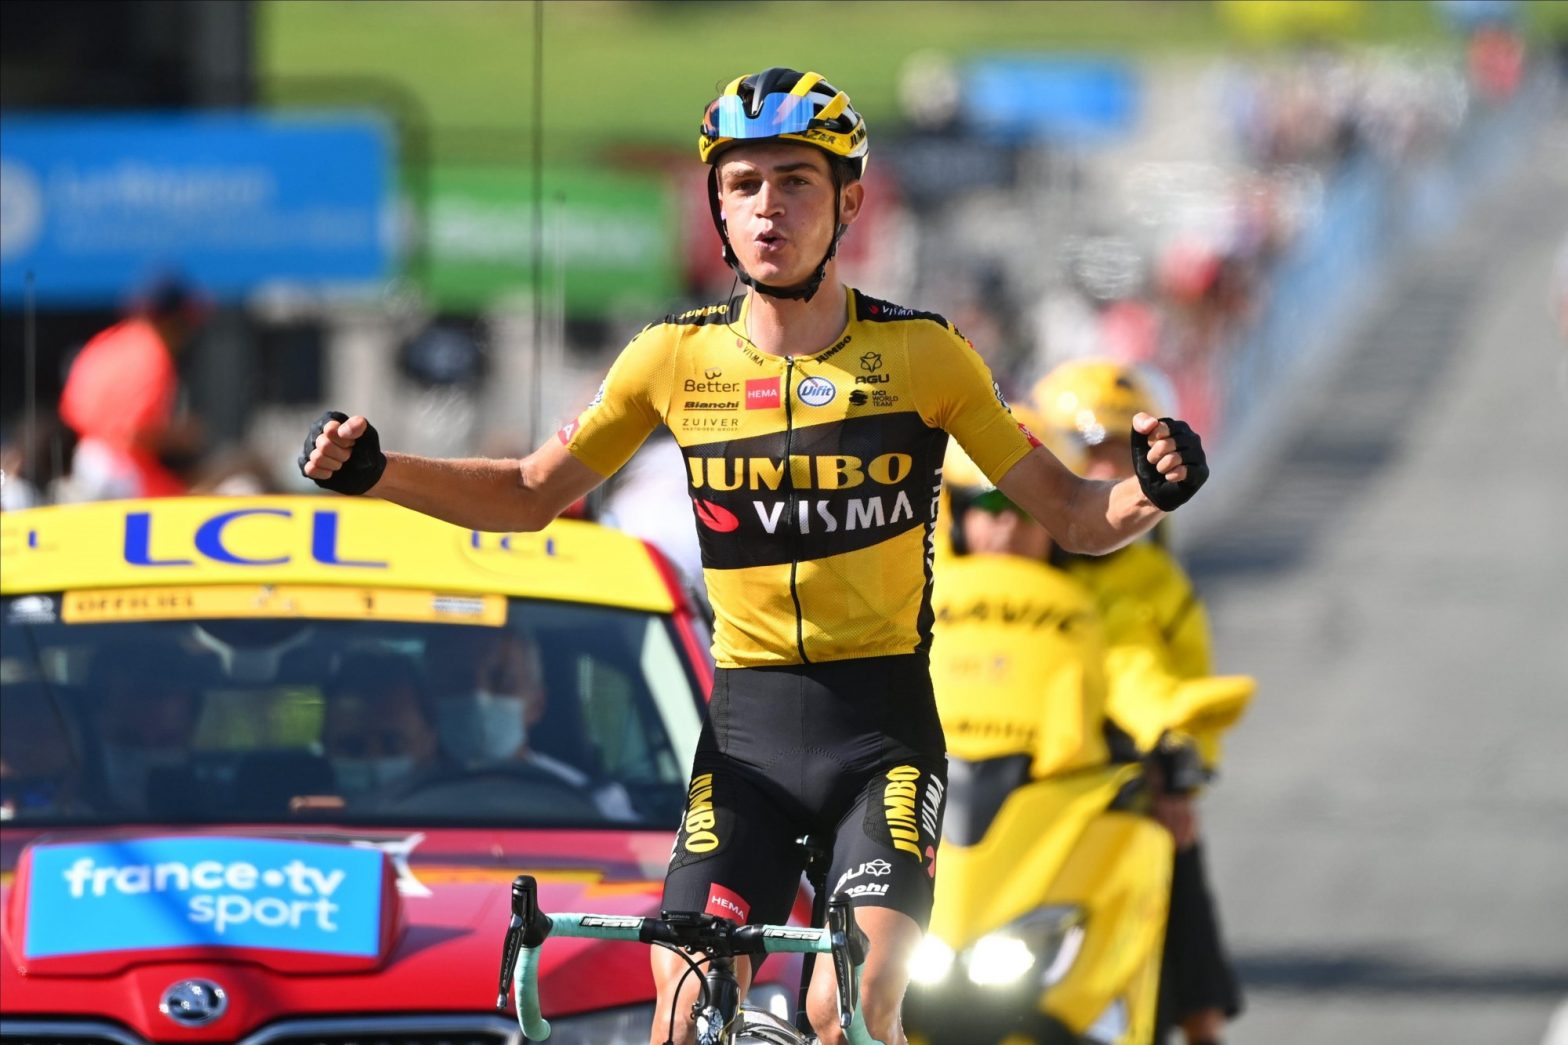 Who is the US cyclist, Sepp Kuss, in Tour de France? All about the